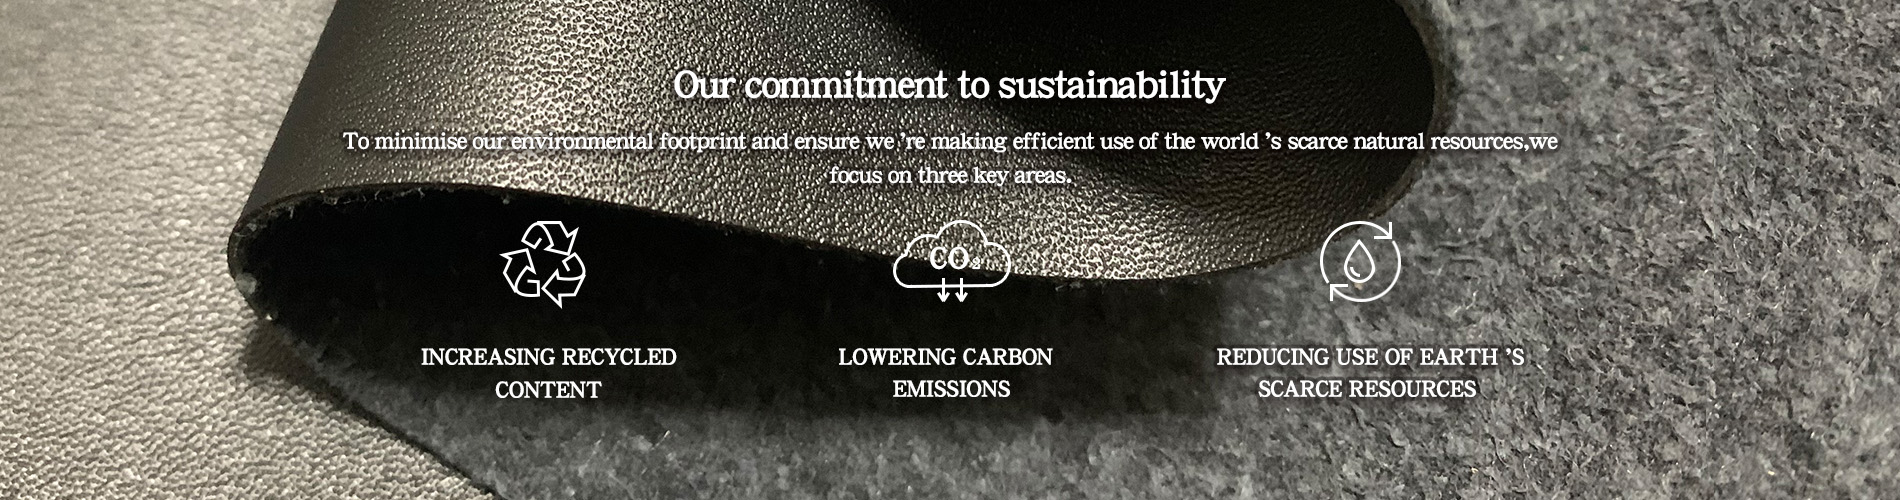 sustainability recycled leatherb